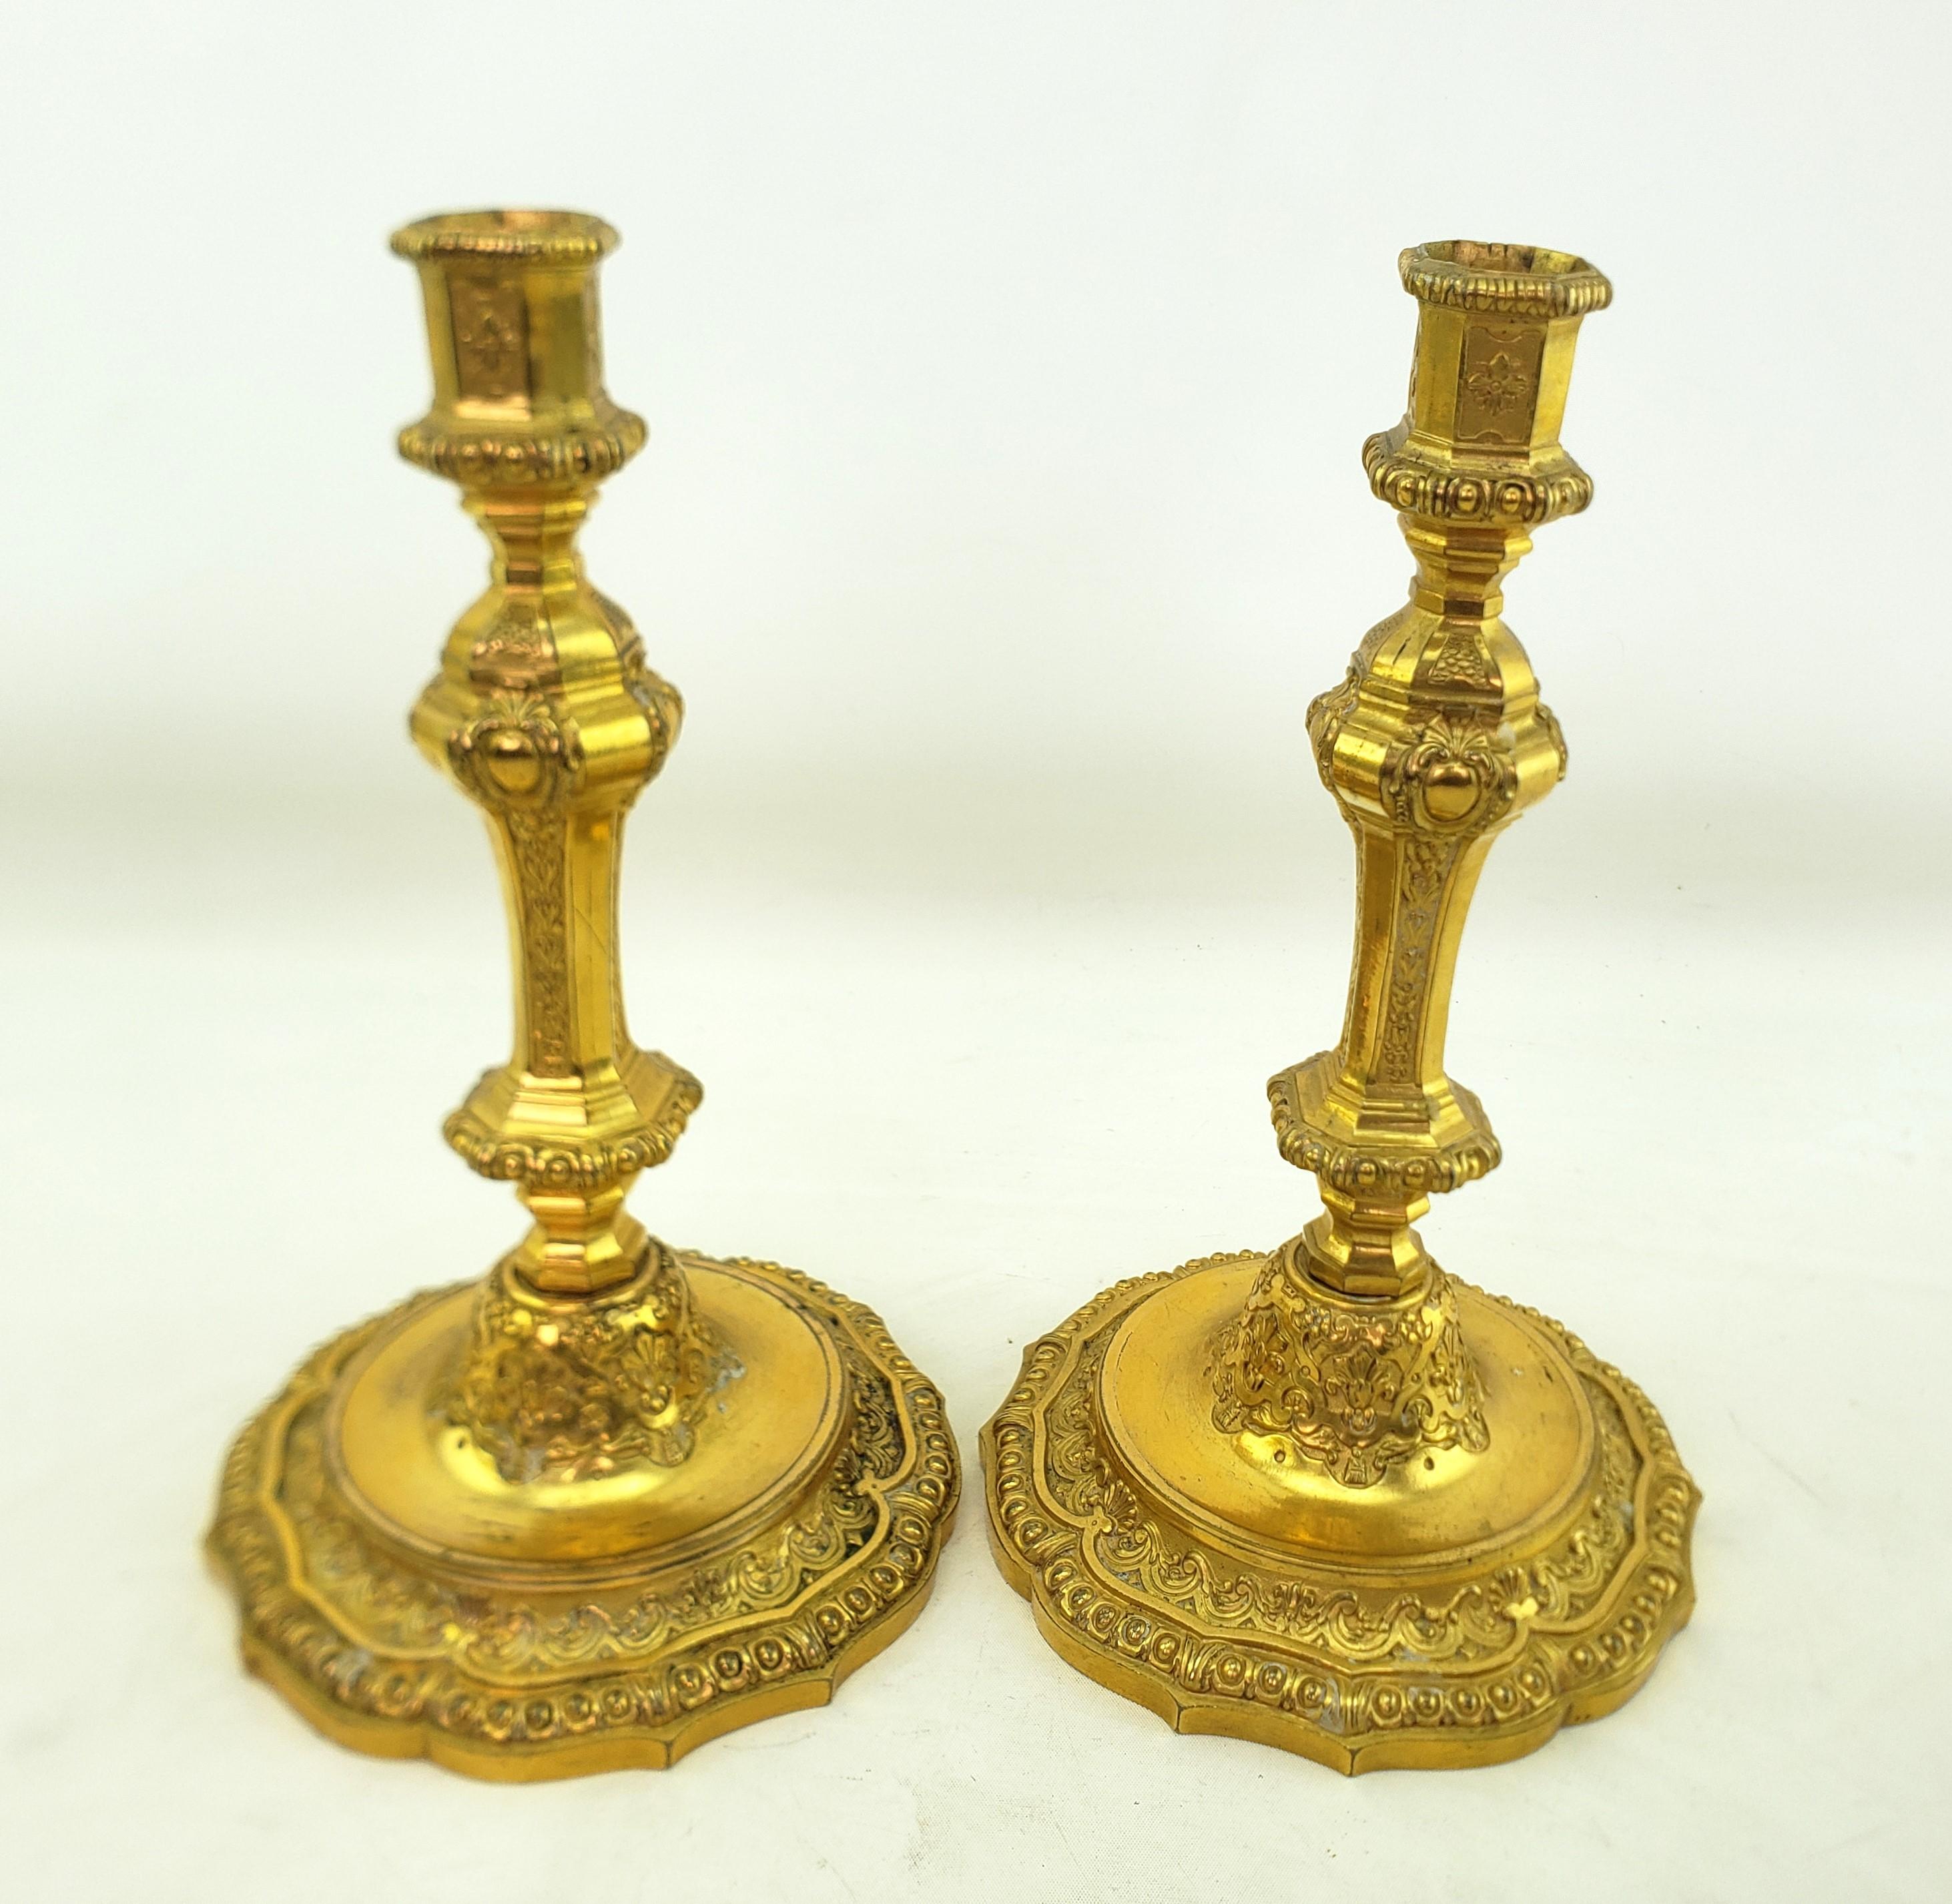 Cast Pair of Antique Louis XIV Styled Gilt Bronze Candlesticks with Stylized Flowers For Sale